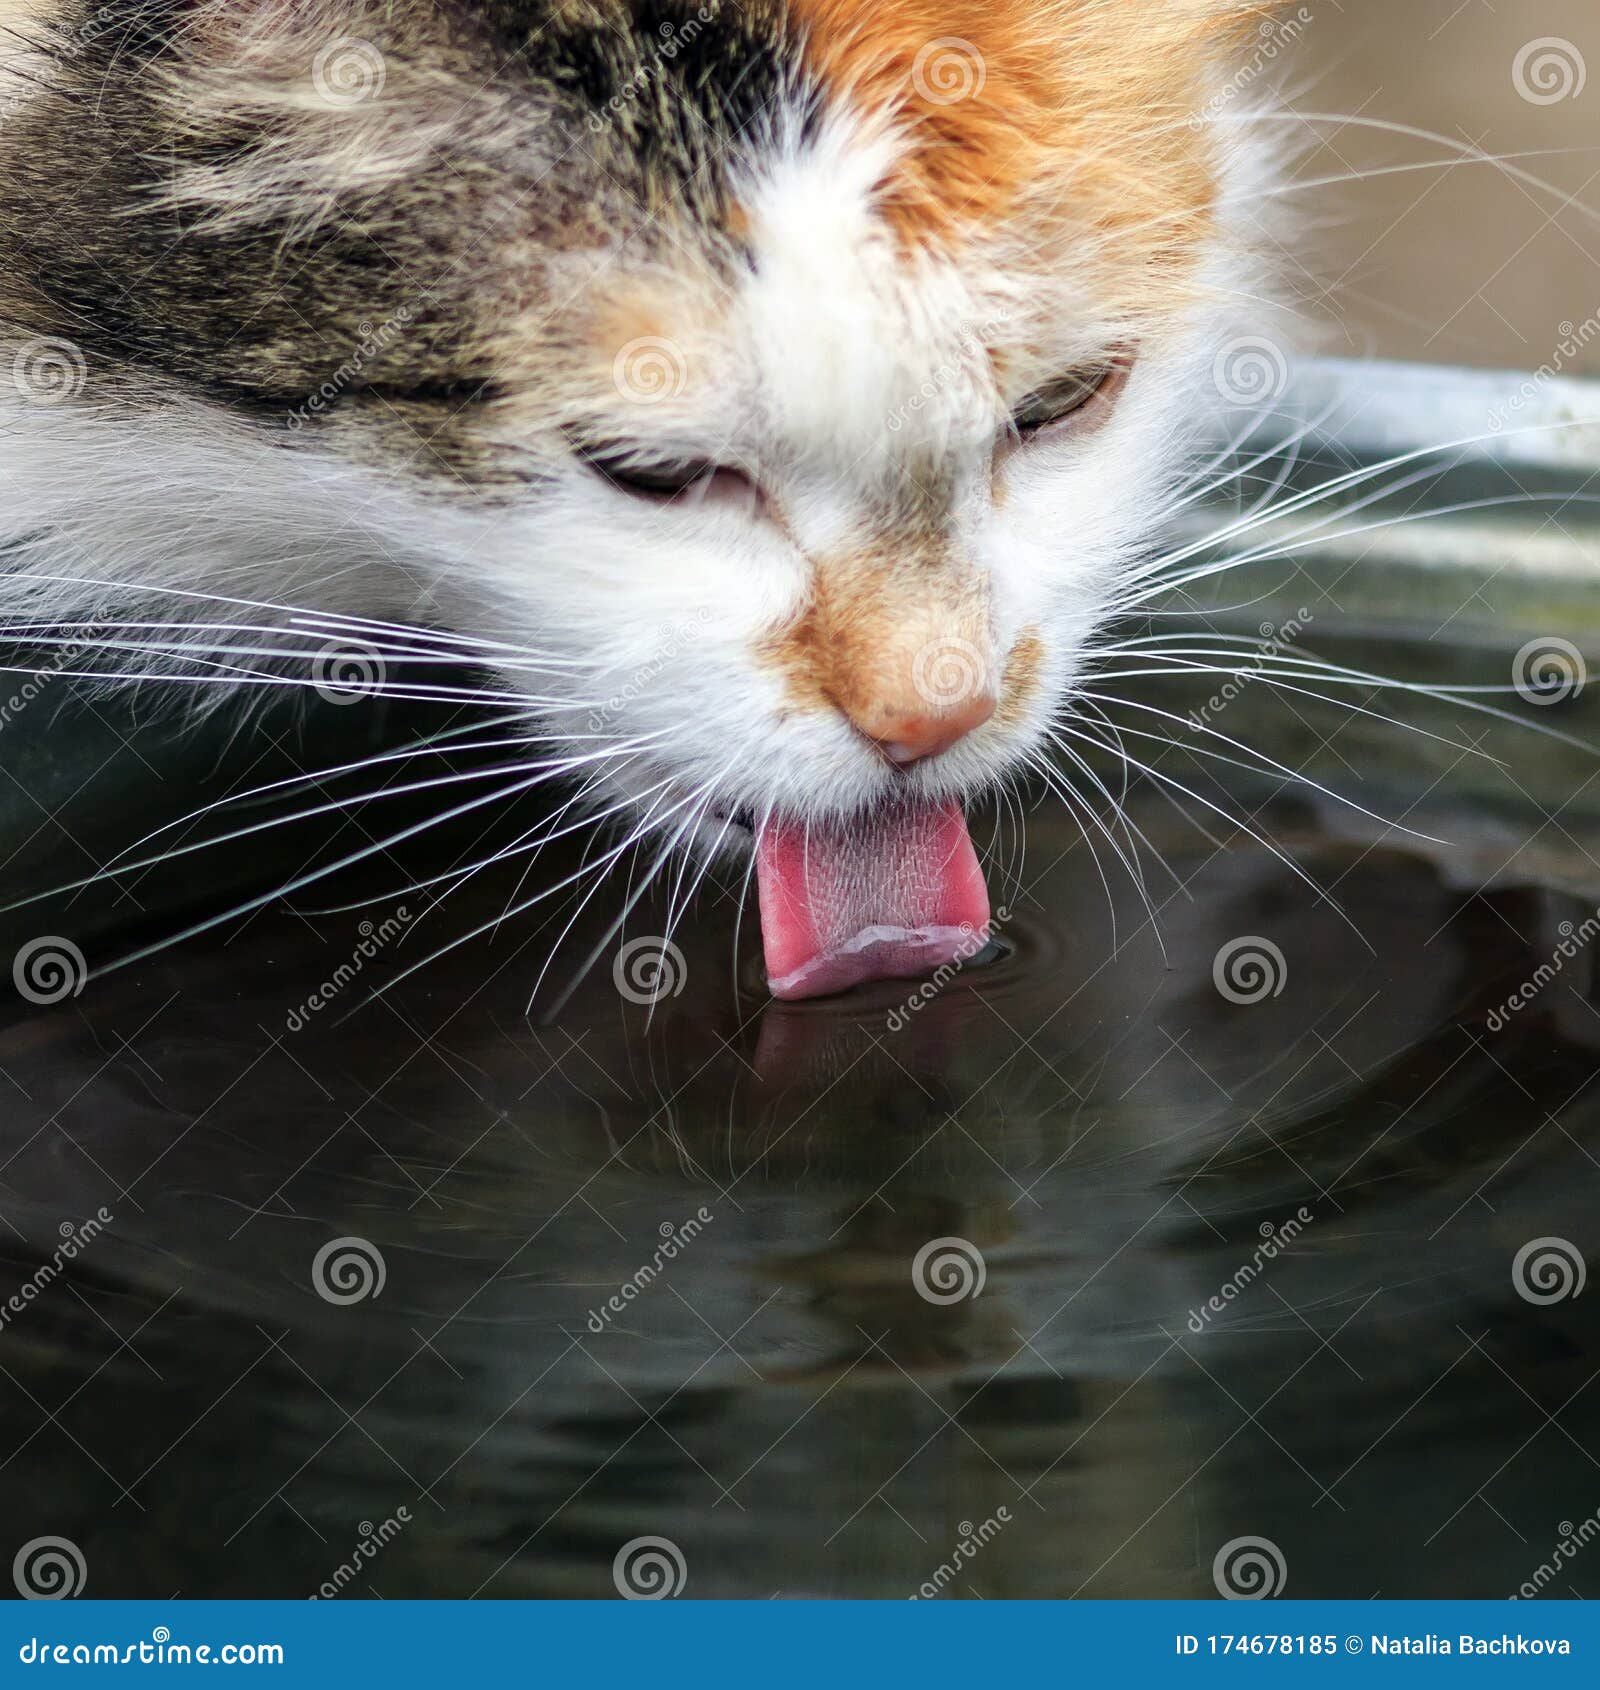 Portrait With A Cute Fluffy Cat Drinking Water From A Bucket On The